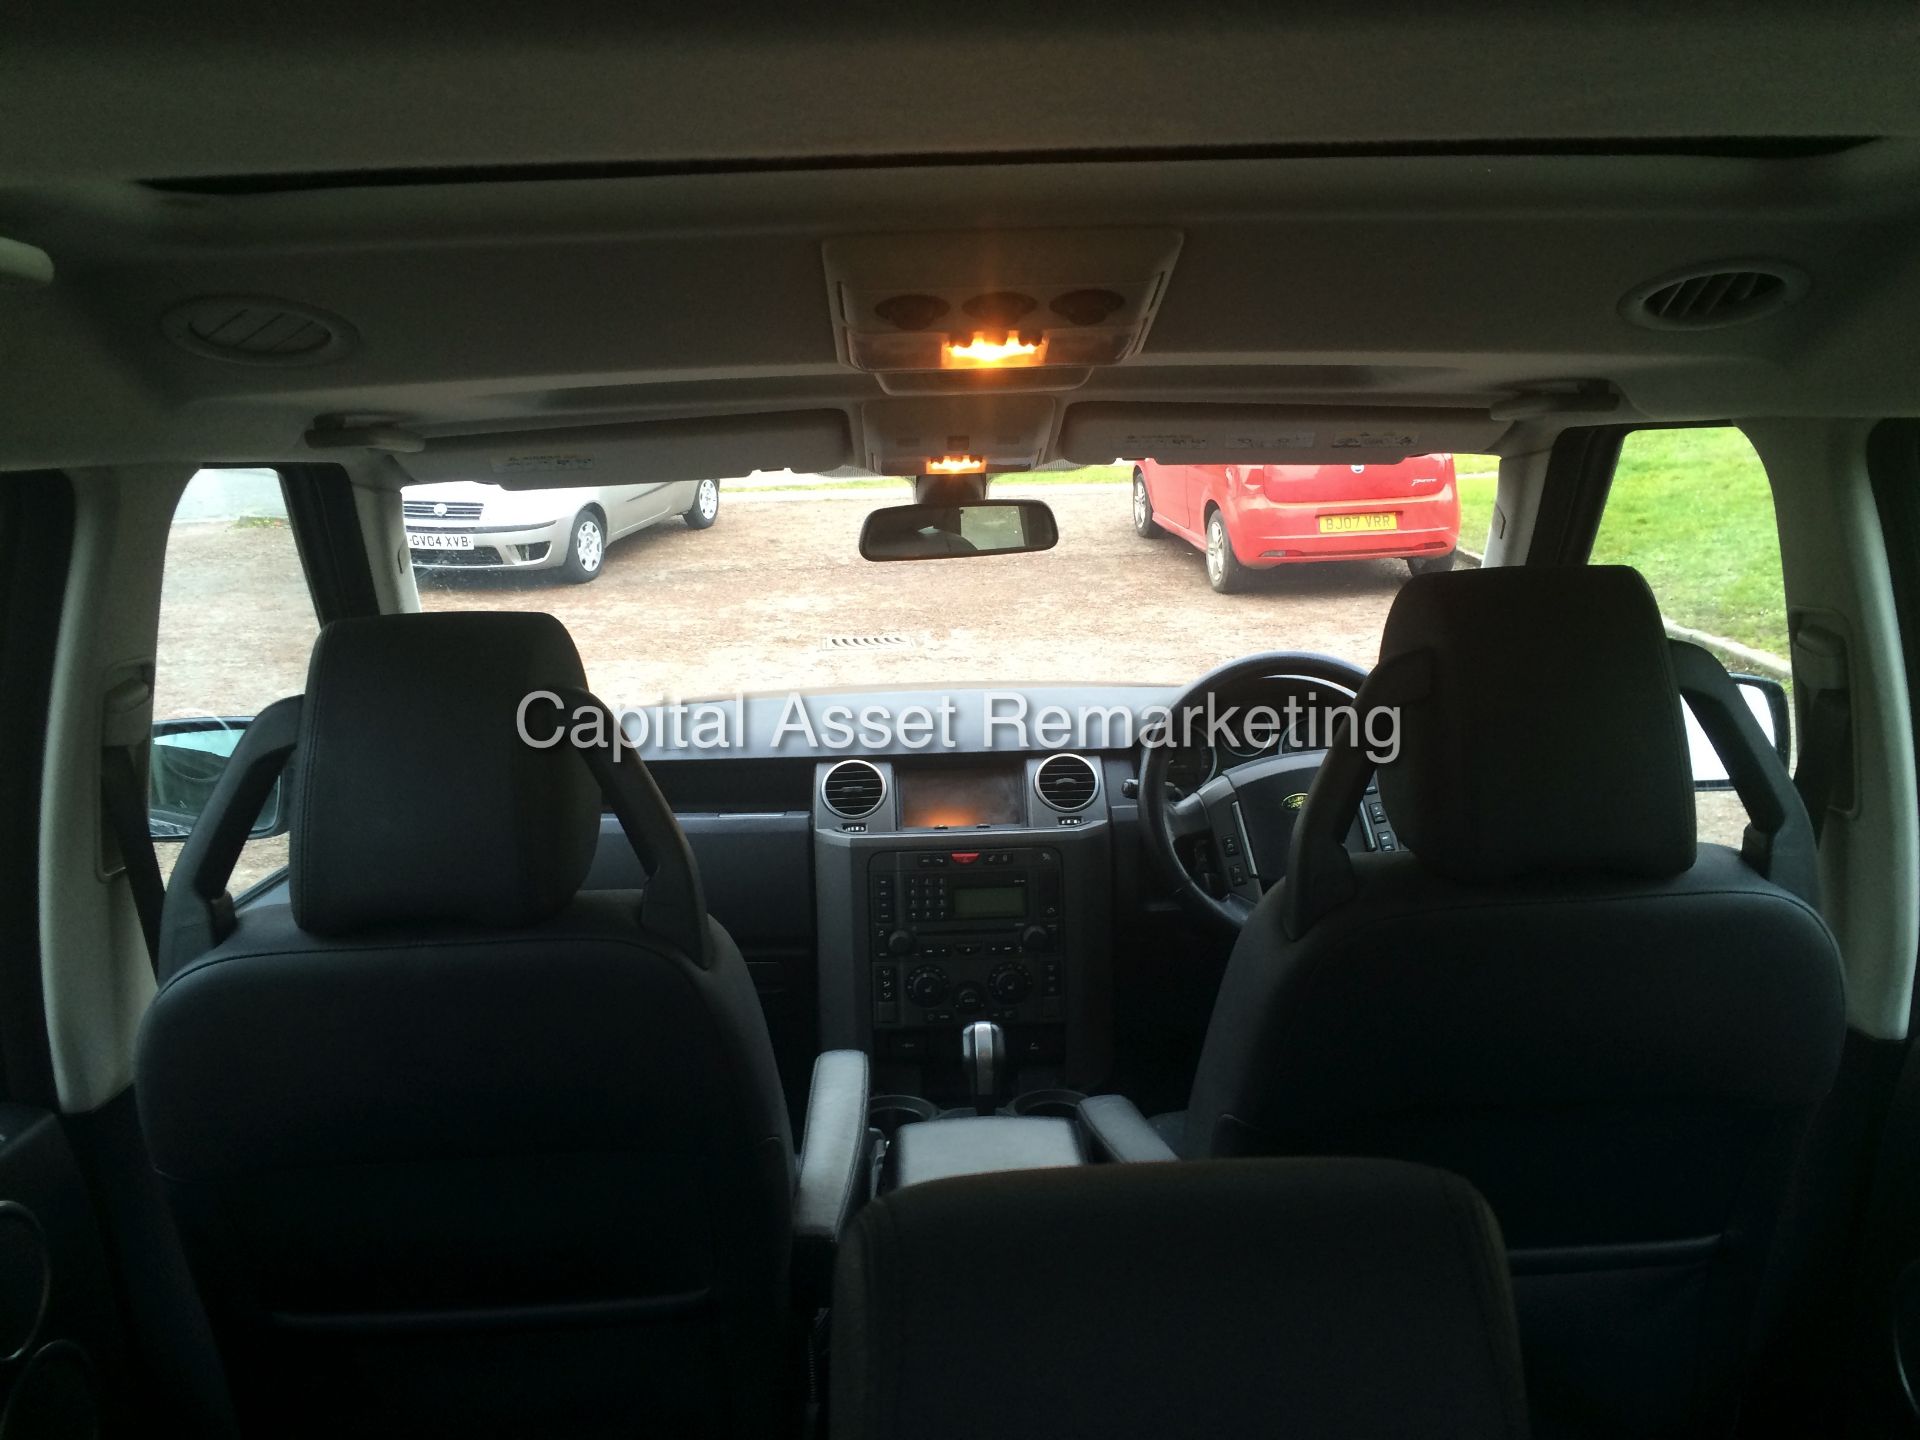 (ON SALE) LAND ROVER DISCOVERY 3 "HSE - AUTO" 7 SEATER (2007 MODEL) SAT NAV - LEATHER - NO VAT - Image 11 of 20